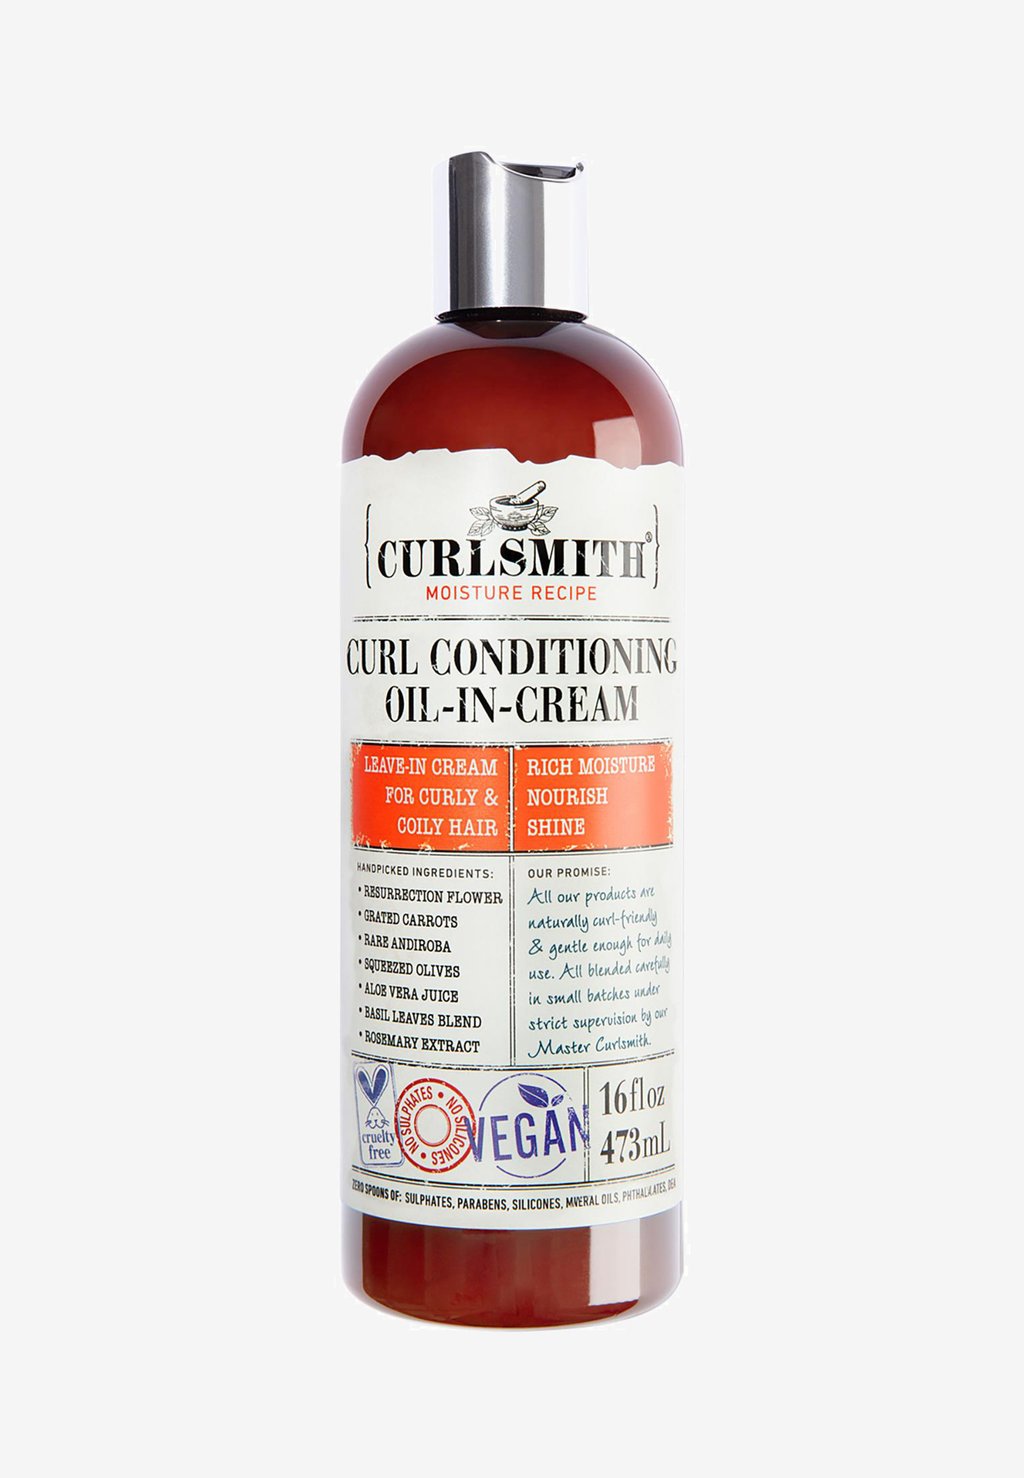 Уход за волосами Curl Conditioning Oil-In-Cream Xl Curlsmith уход за волосами effortless waves curlsmith